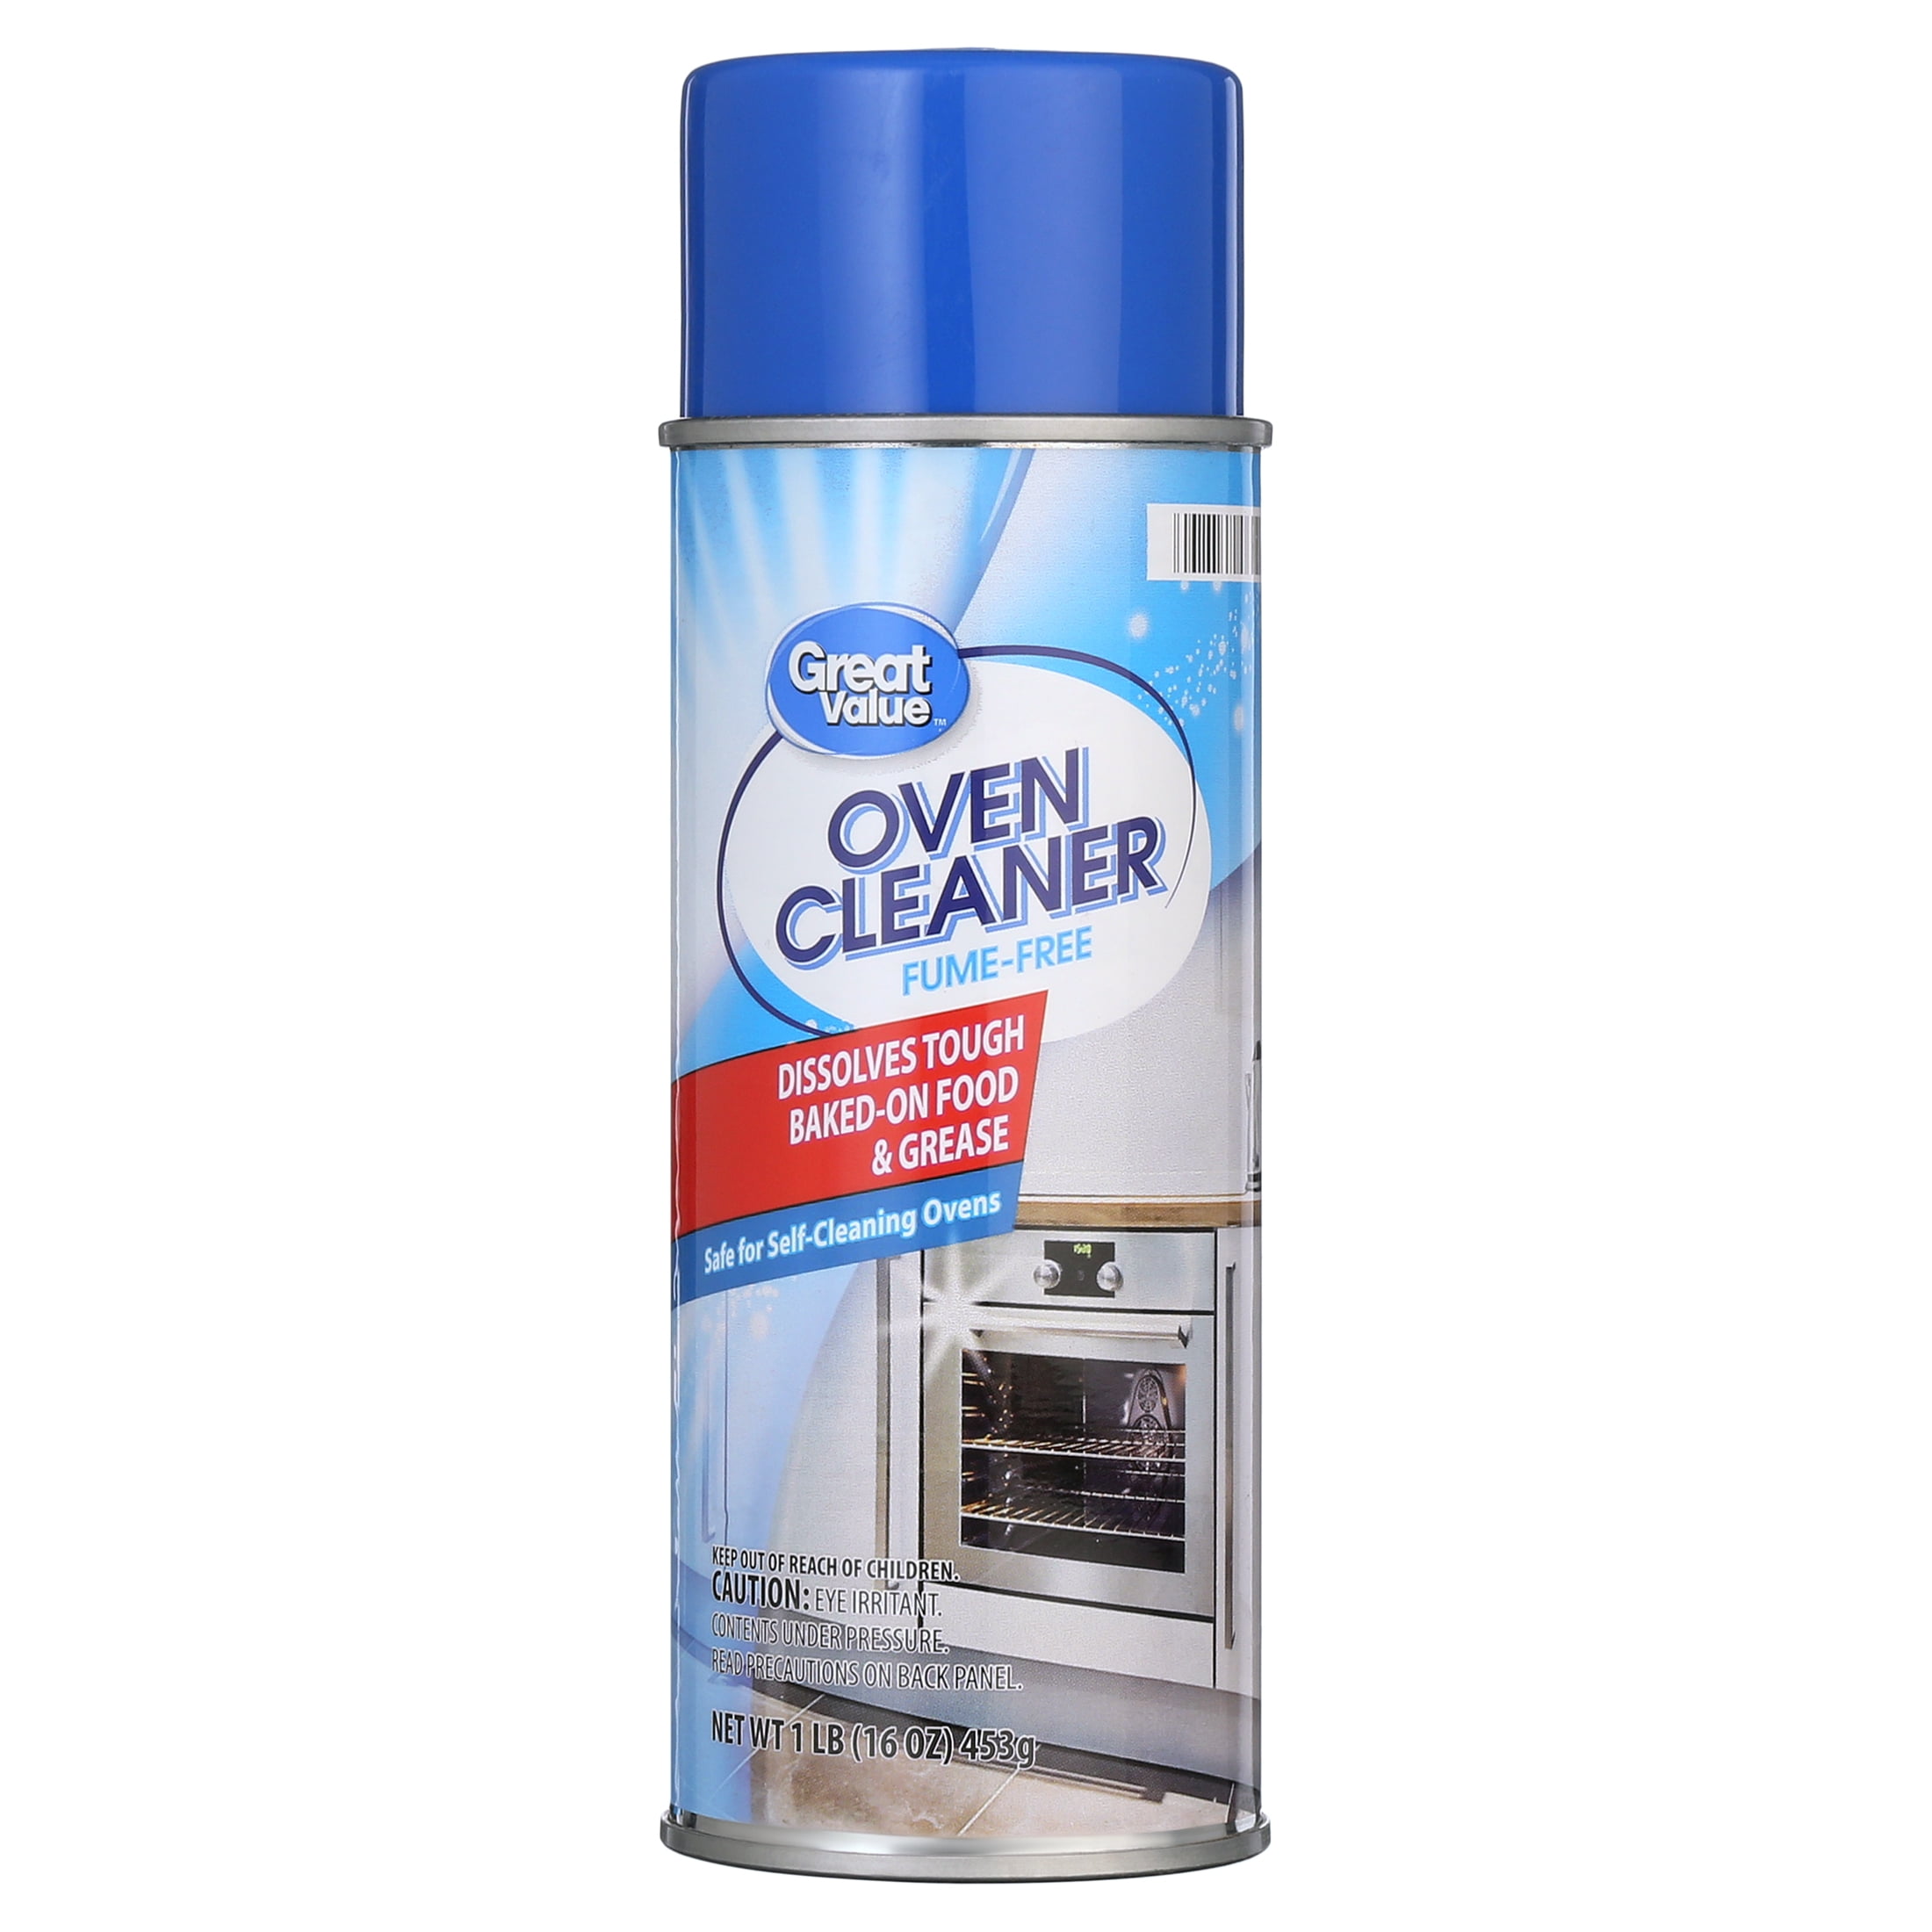 Great Value Fume Free Oven Cleaner, 16 Ounce